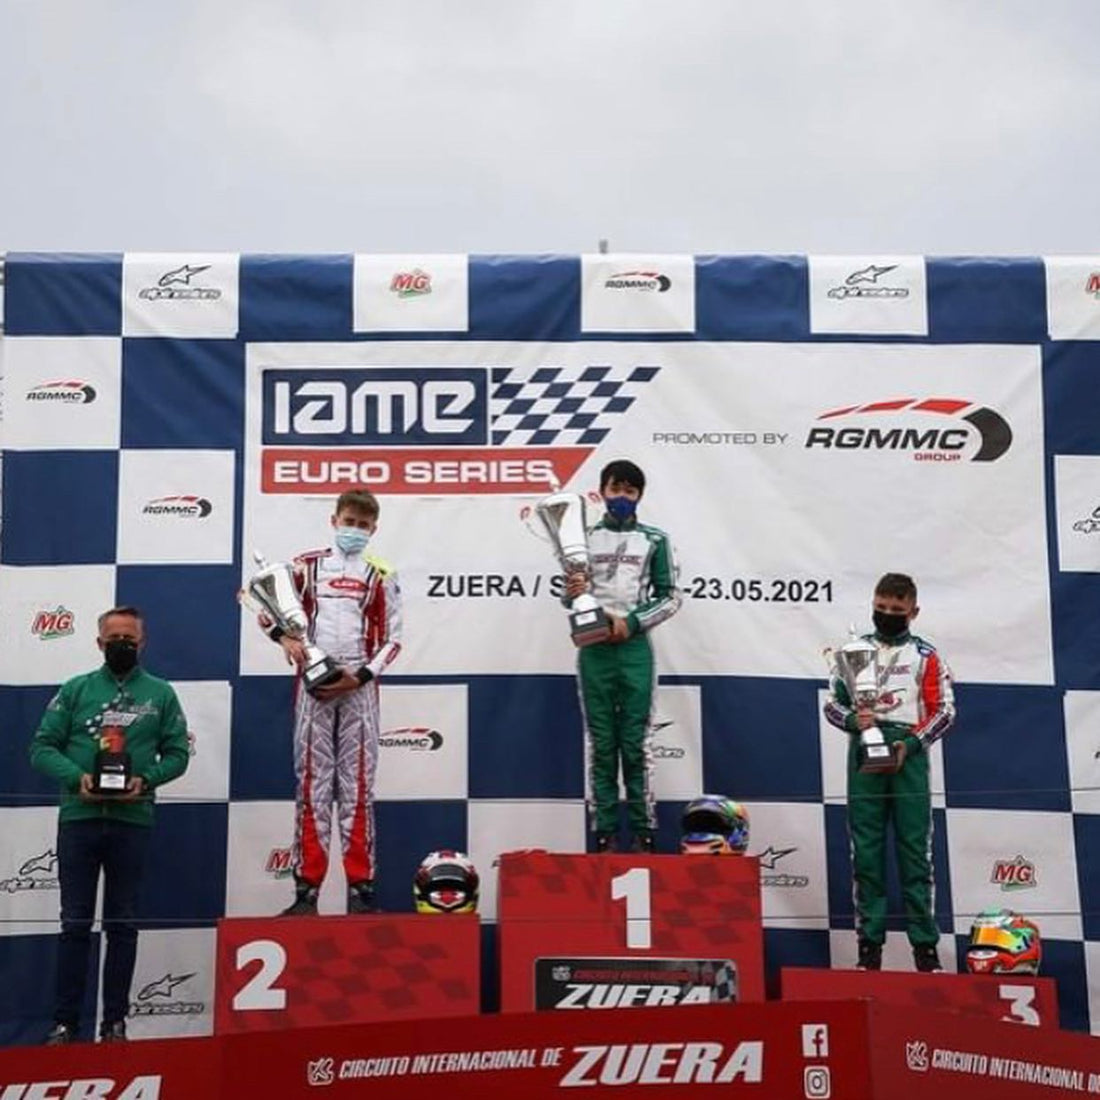 Phillips on the podium in Spain!